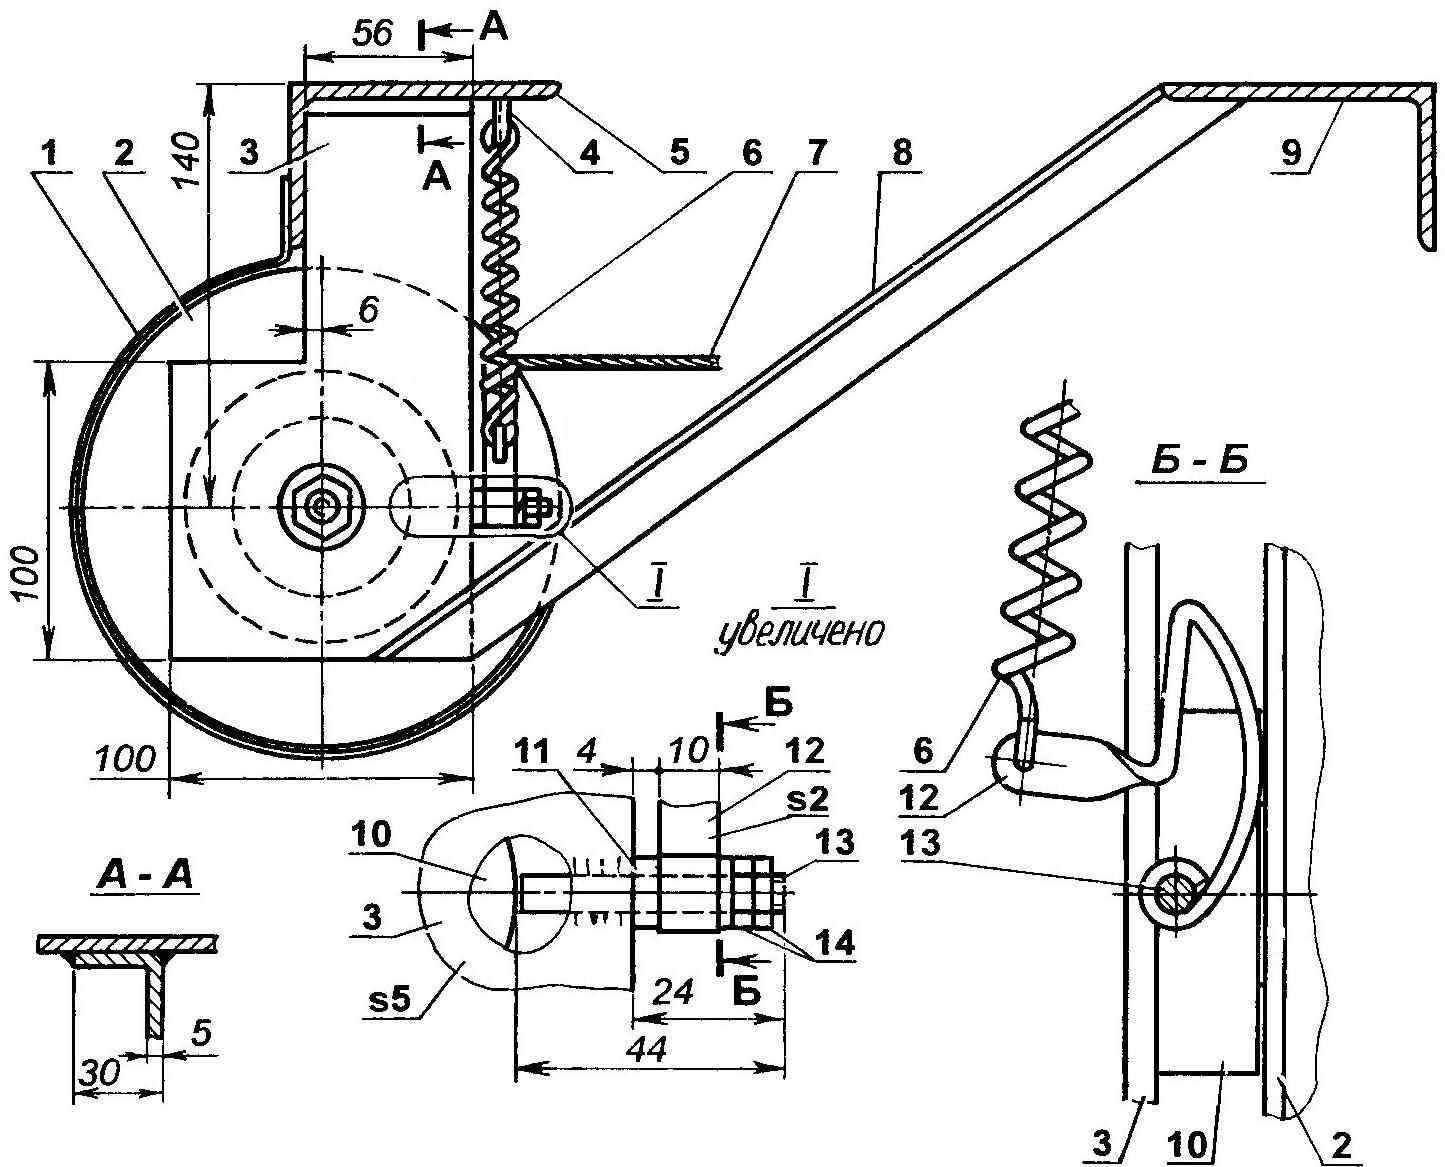 The layout of the winch and elements of its fastening to the frame of the tractor